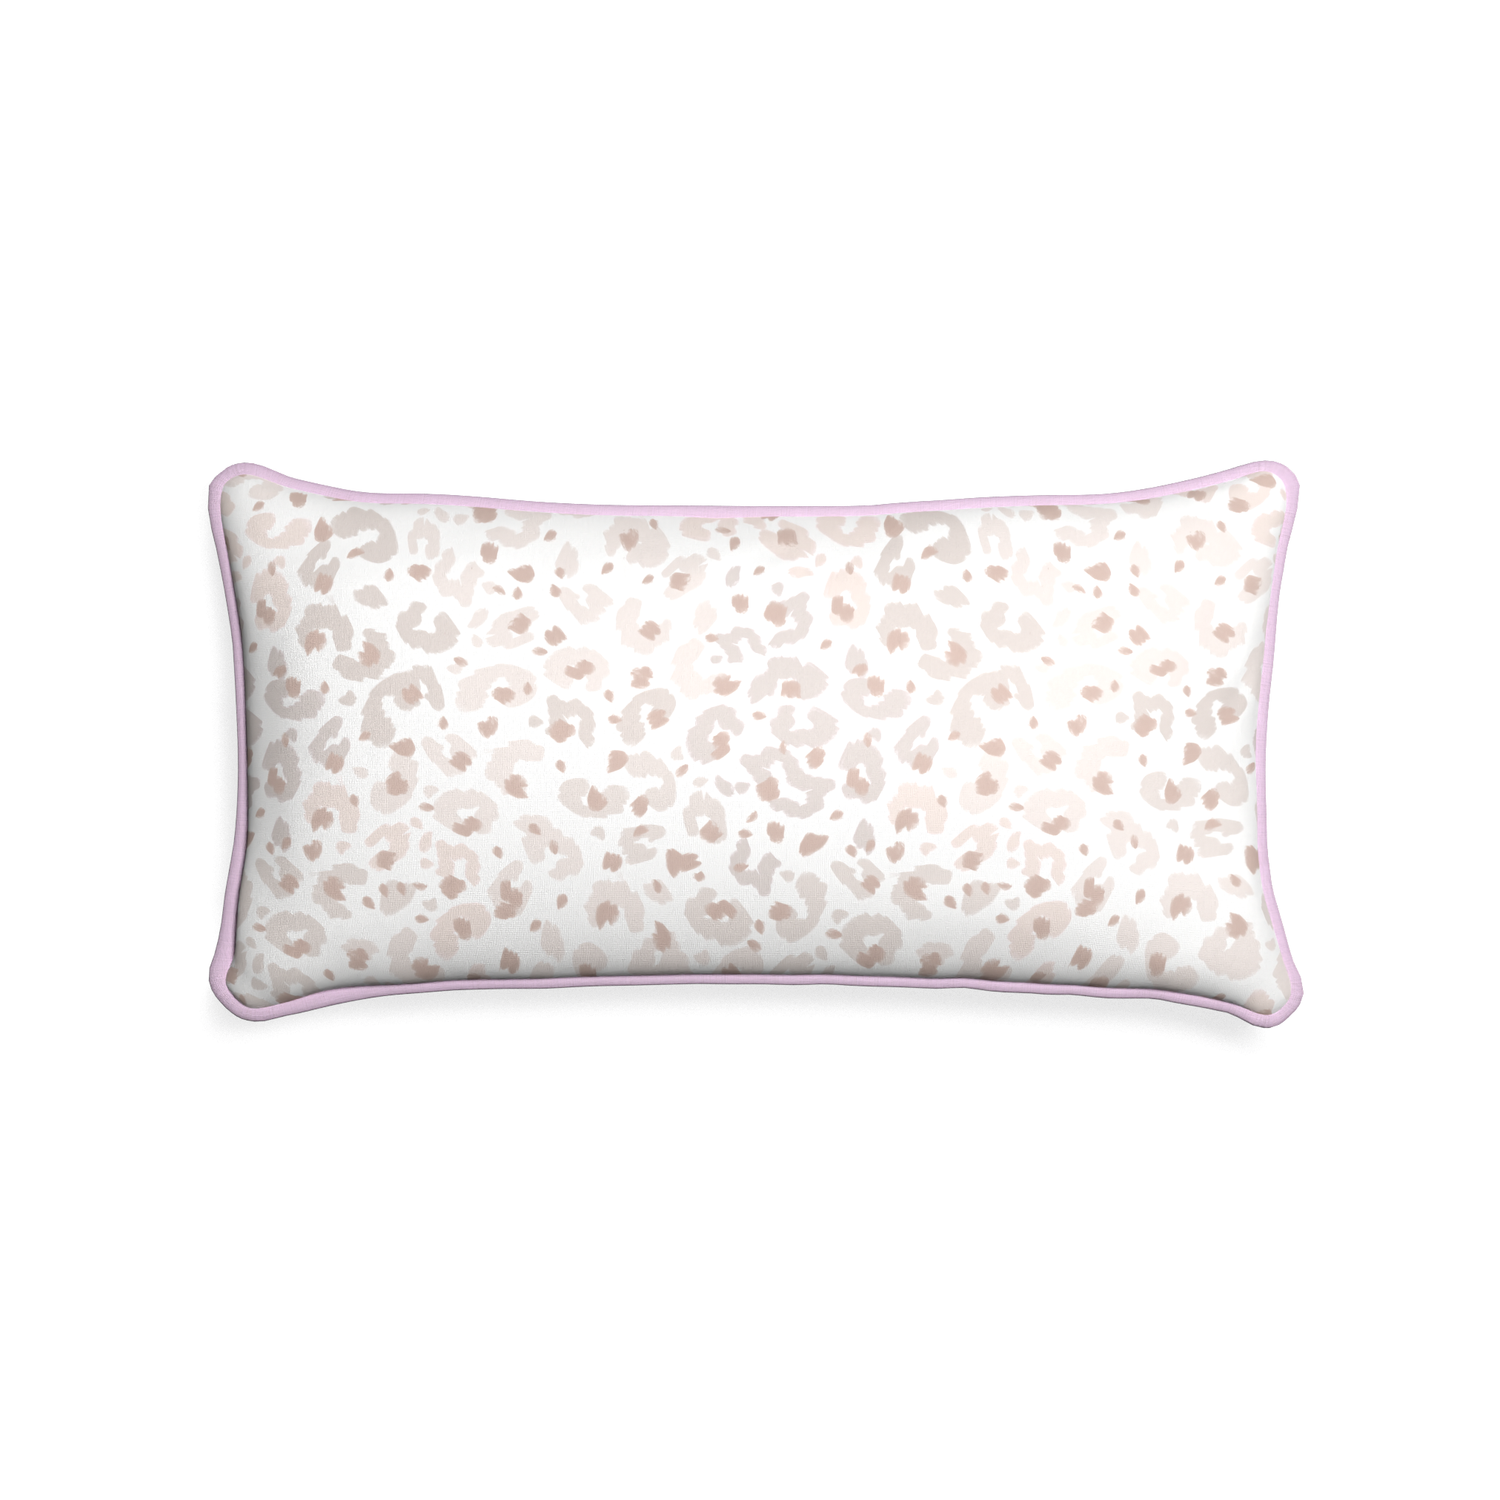 Midi-lumbar rosie custom beige animal printpillow with l piping on white background